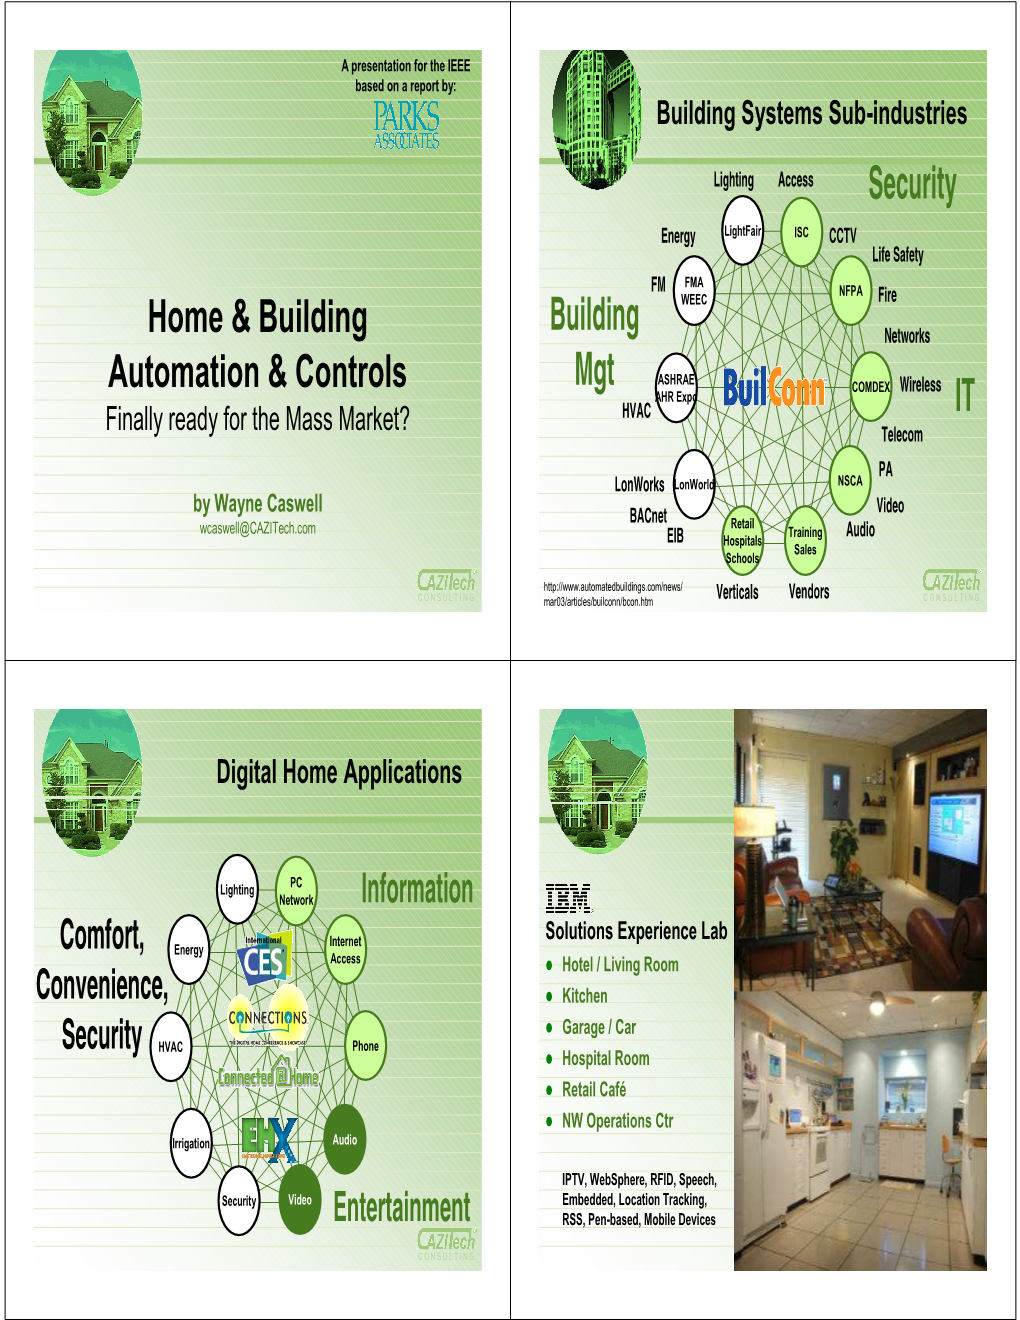 Home & Building Automation & Controls Security Building Mgt IT